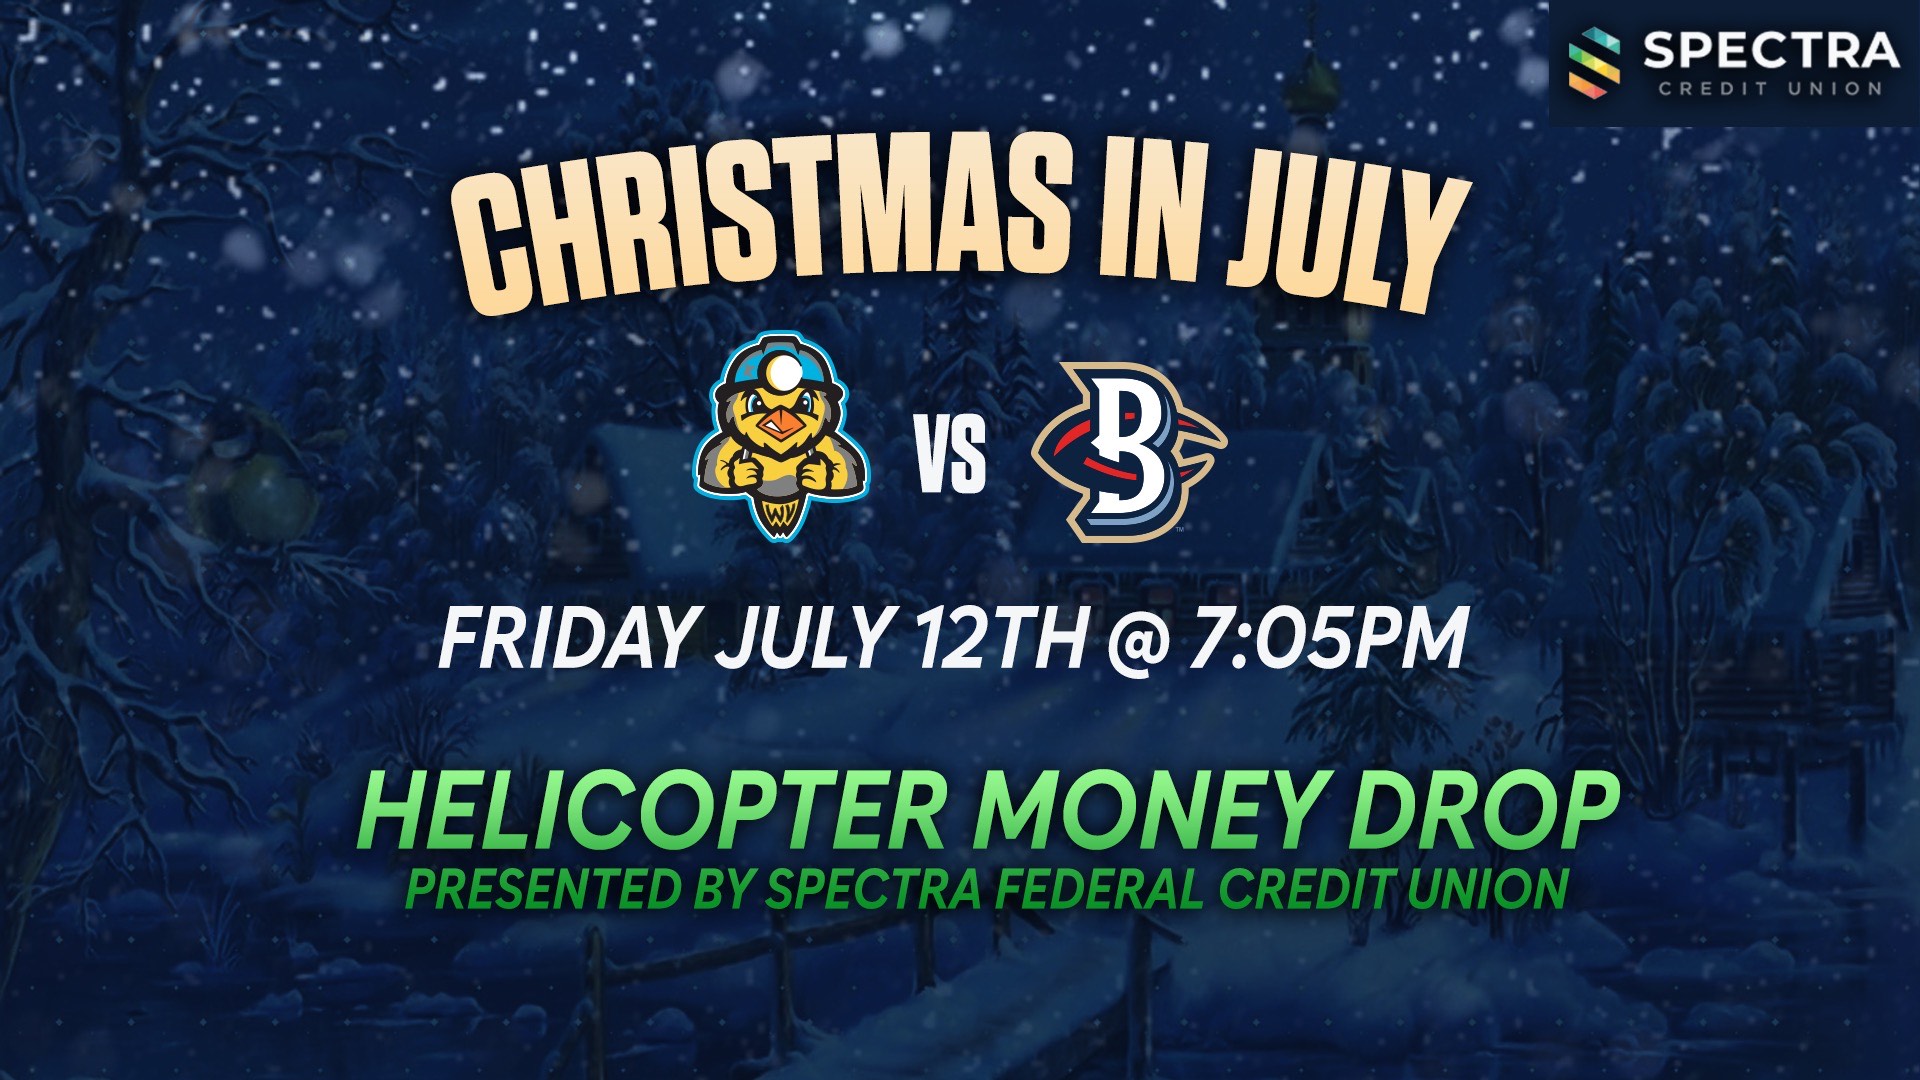 Christmas in July! Spectra Helicopter Money Drop!